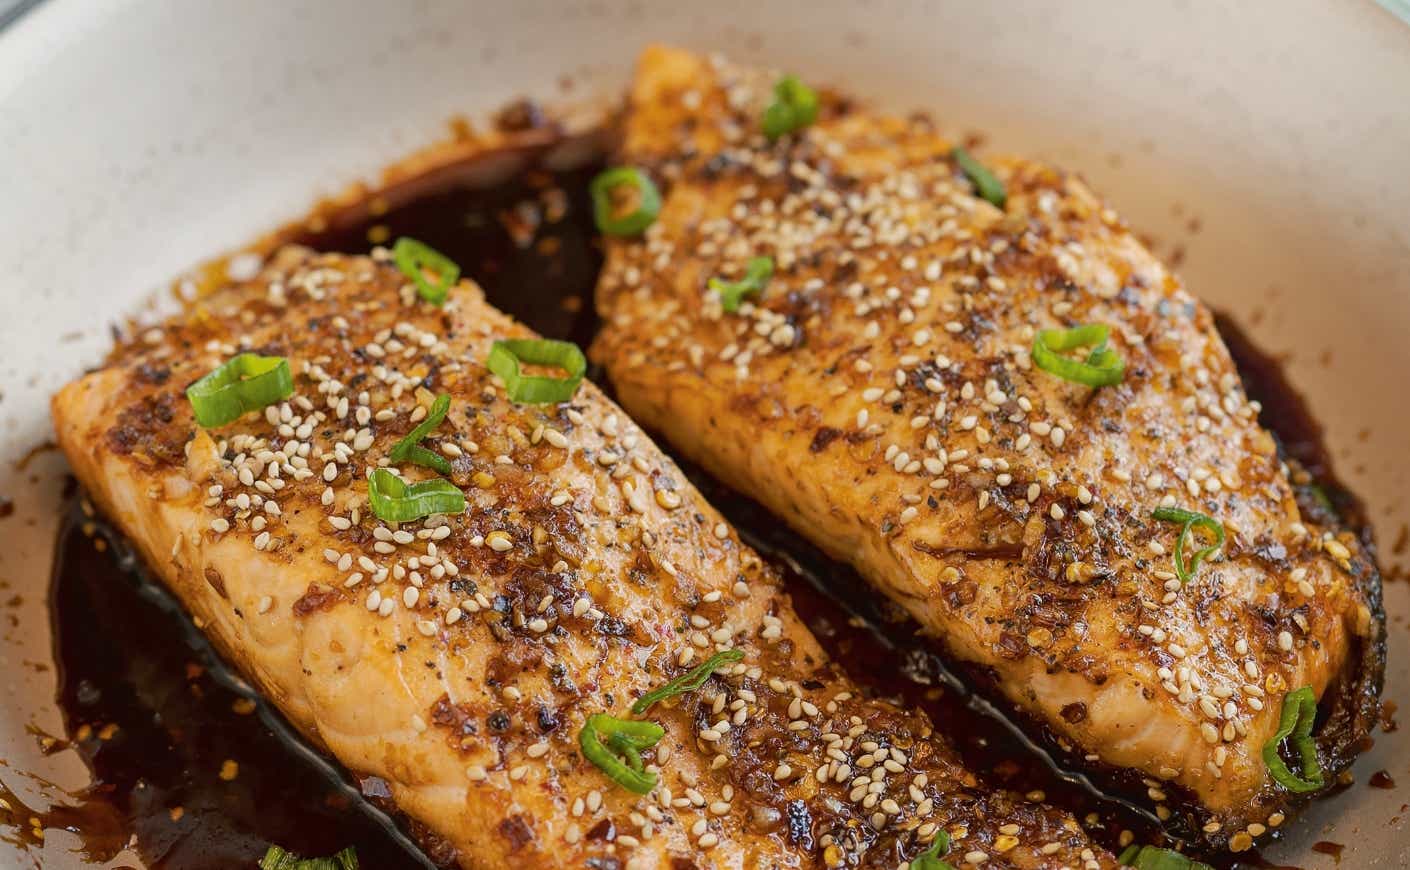 A dish of two miso glazed salmon fillets.